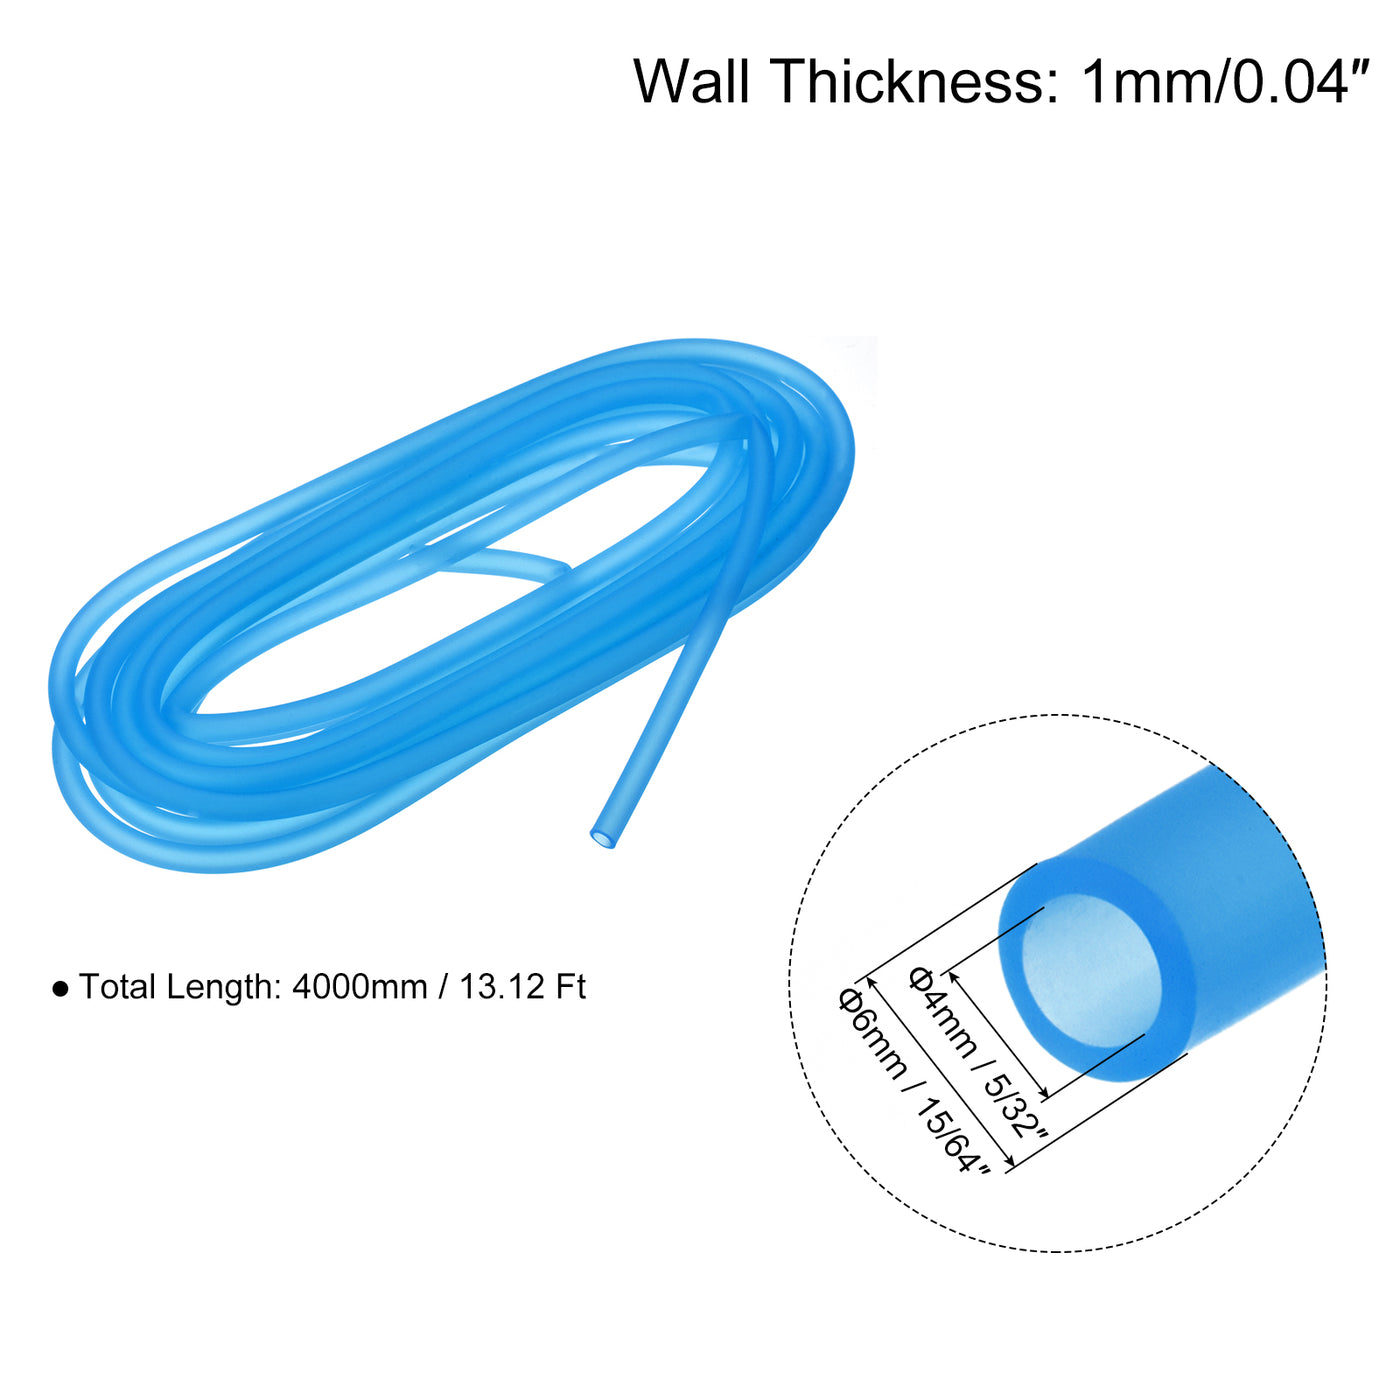 uxcell Uxcell Silicone Tubing 5/32" ID, 15/64" OD 1Pcs 13.12 Ft for Pump Transfer, Blue